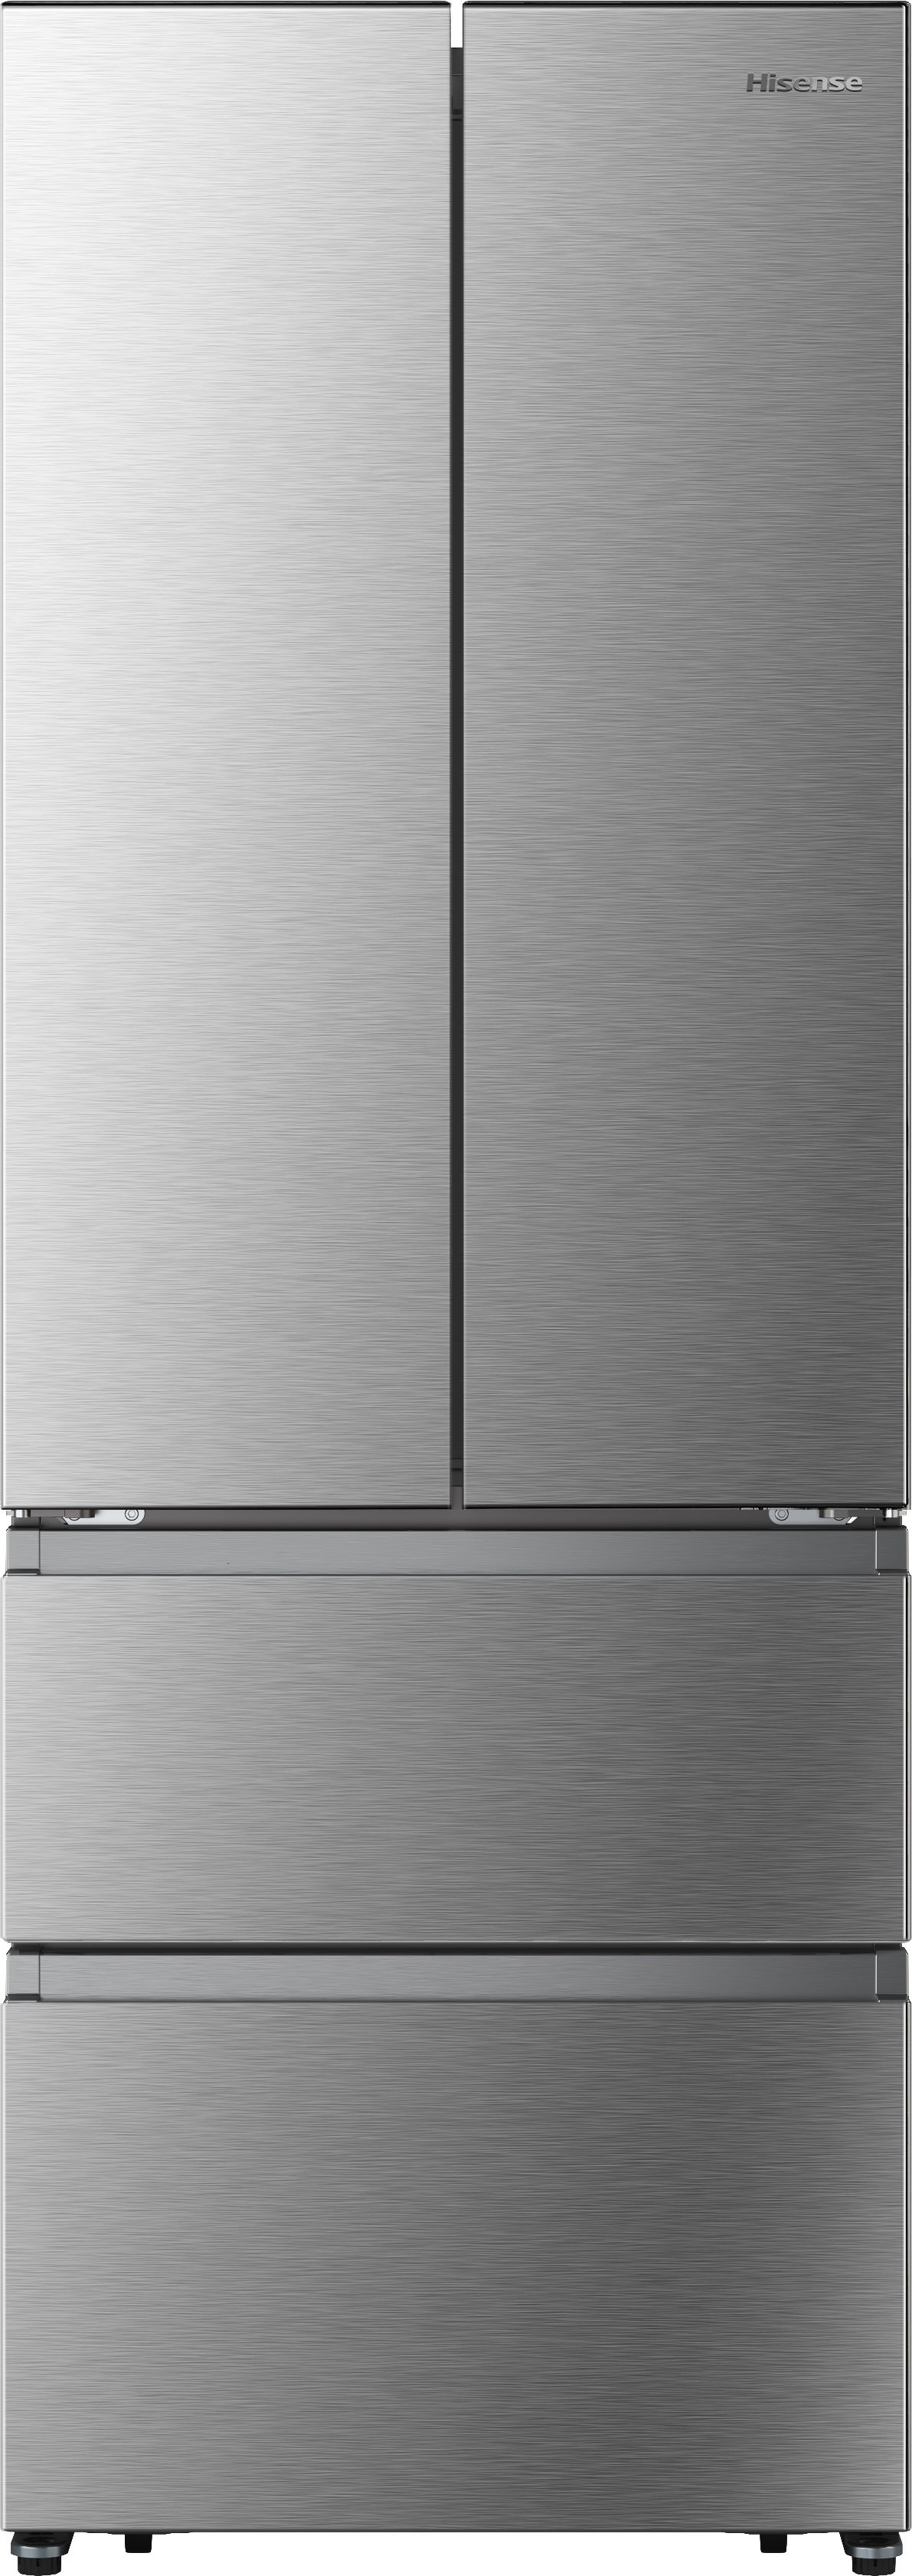 Hisense PureFlat RF632N4BCE Total No Frost American Fridge Freezer - Stainless Steel - E Rated, Stainless Steel